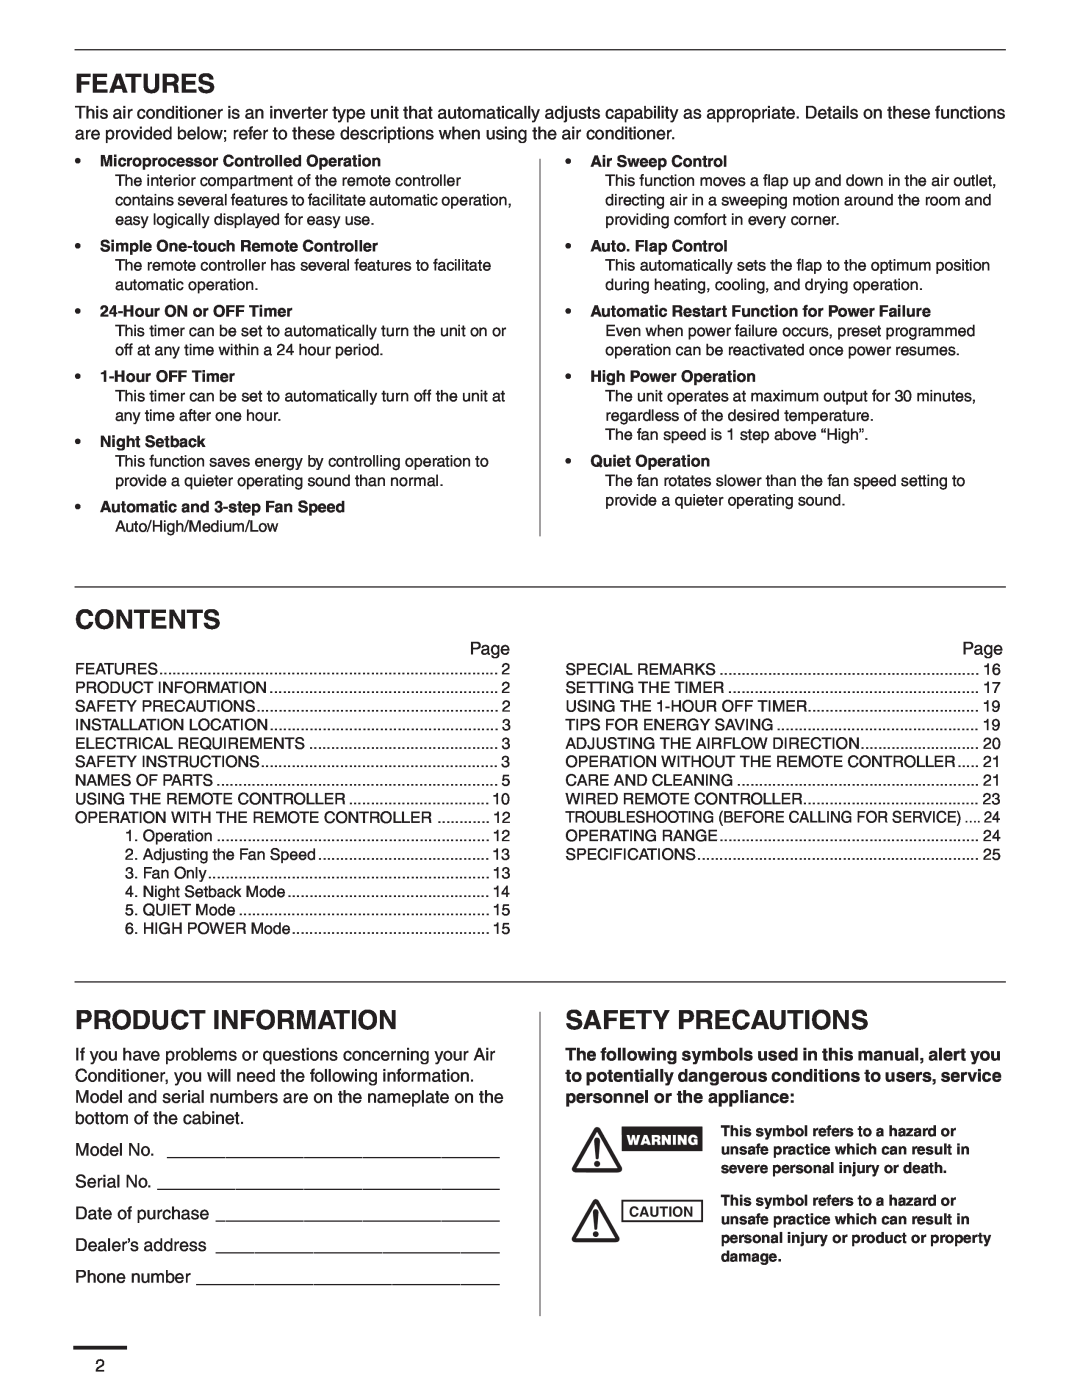 Panasonic CS-MKS12NKU, CS-MKS9NKU, CS-MKS7NKU appendix Features, Contents, Product Information, Safety Precautions 